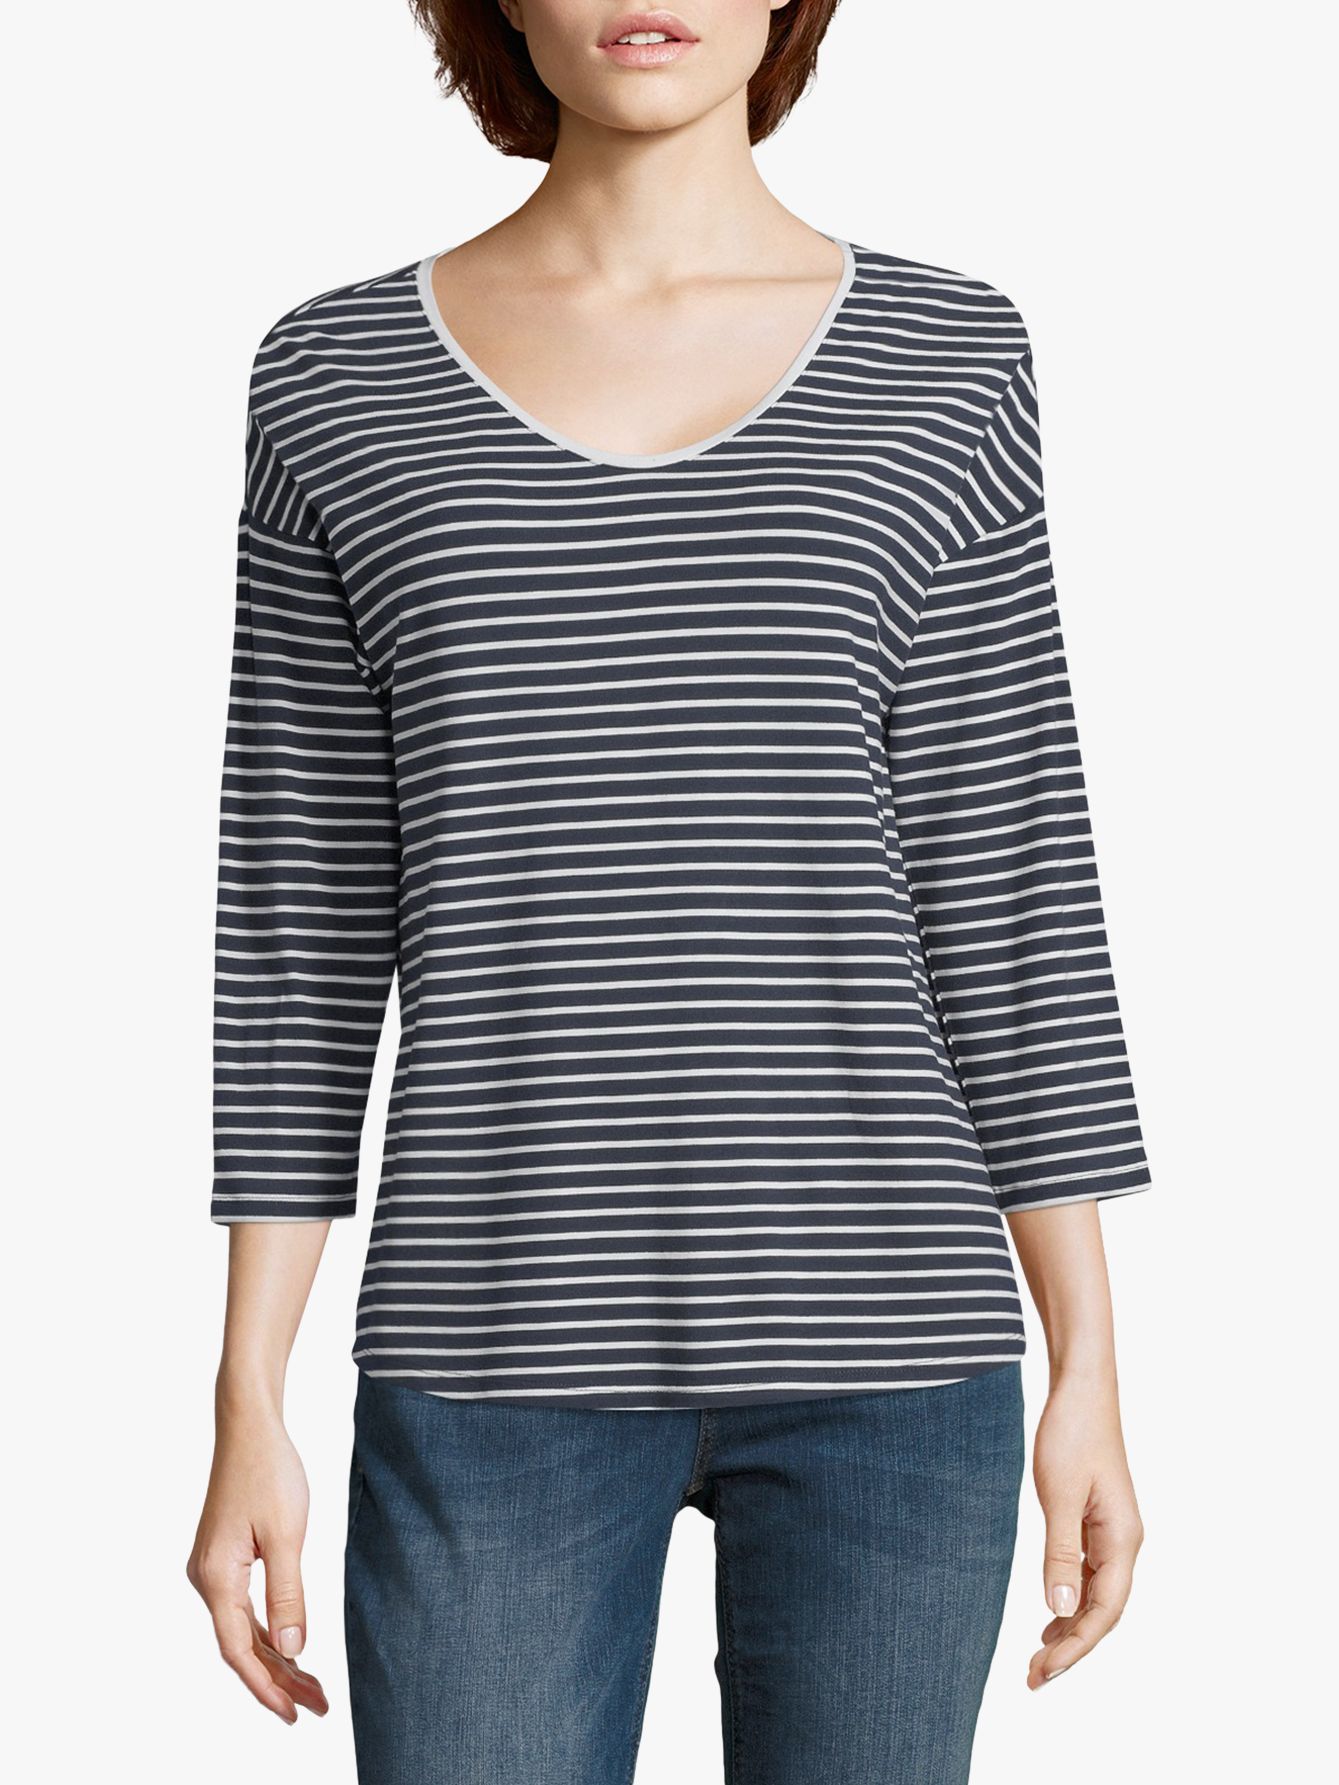 Betty & Co Striped Top, Navy/White